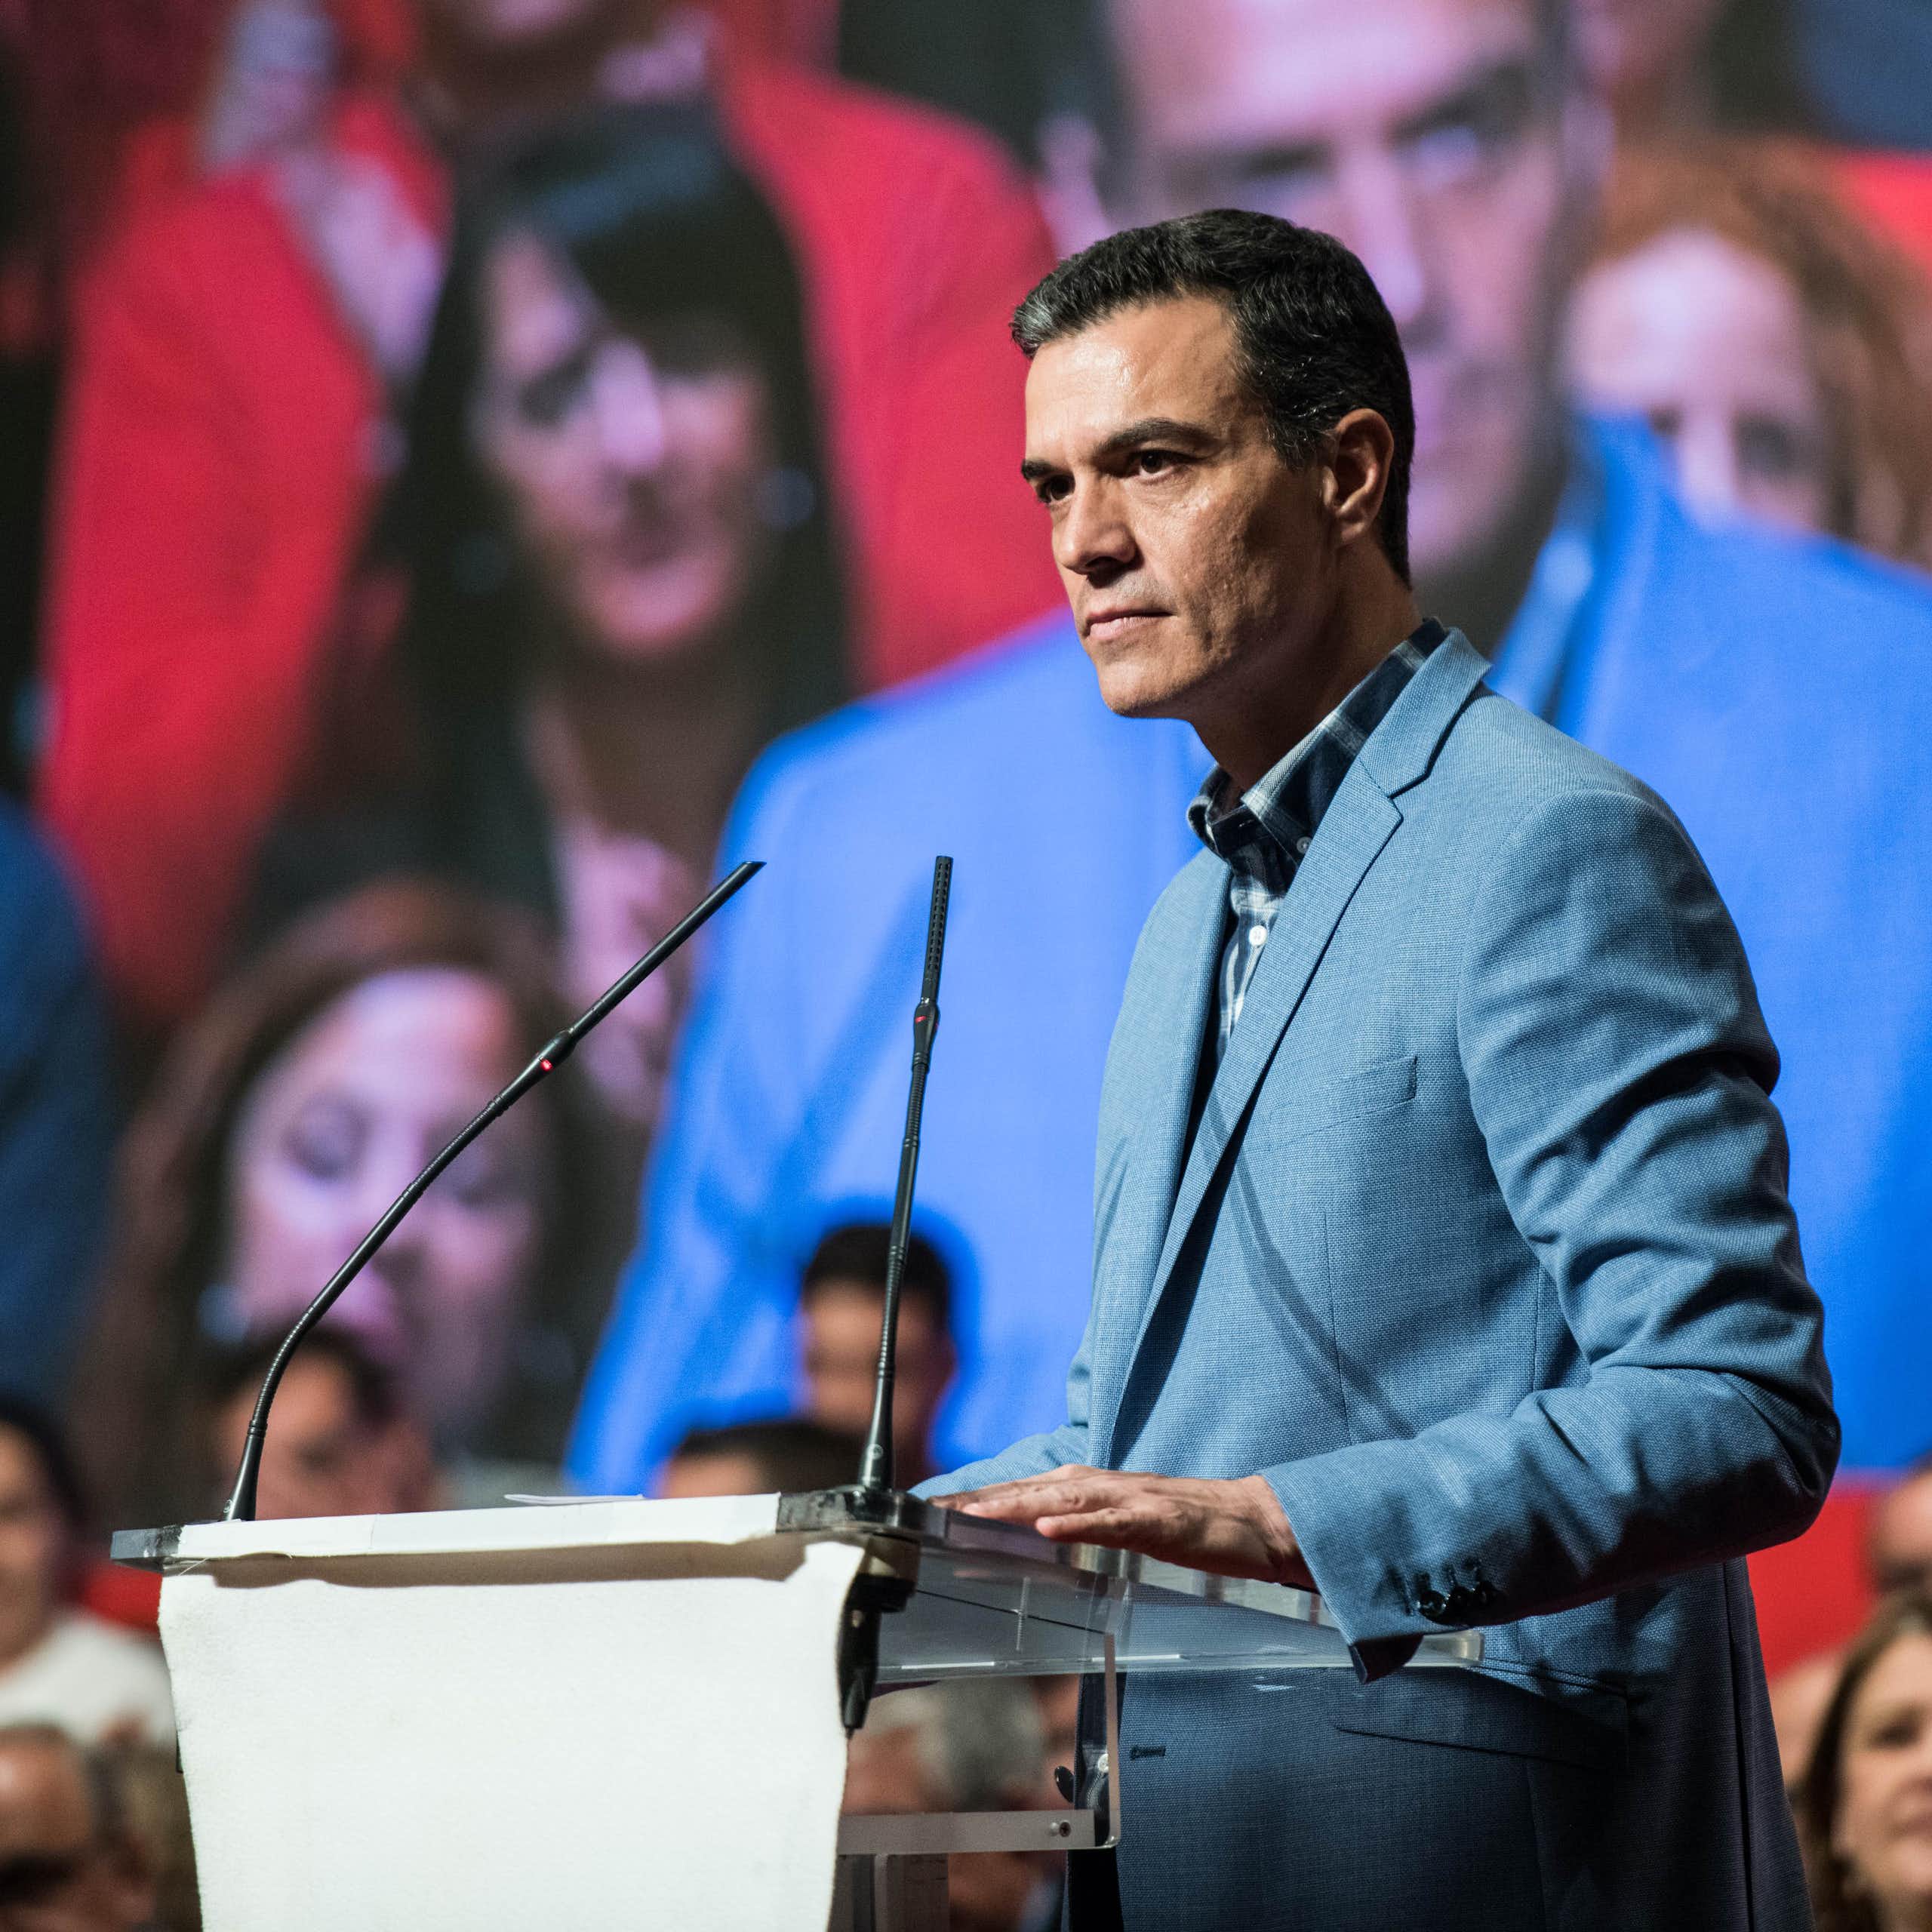 Pedro Sánchez’s ‘letter to the citizens’ of Spain assessed by a political communications expert